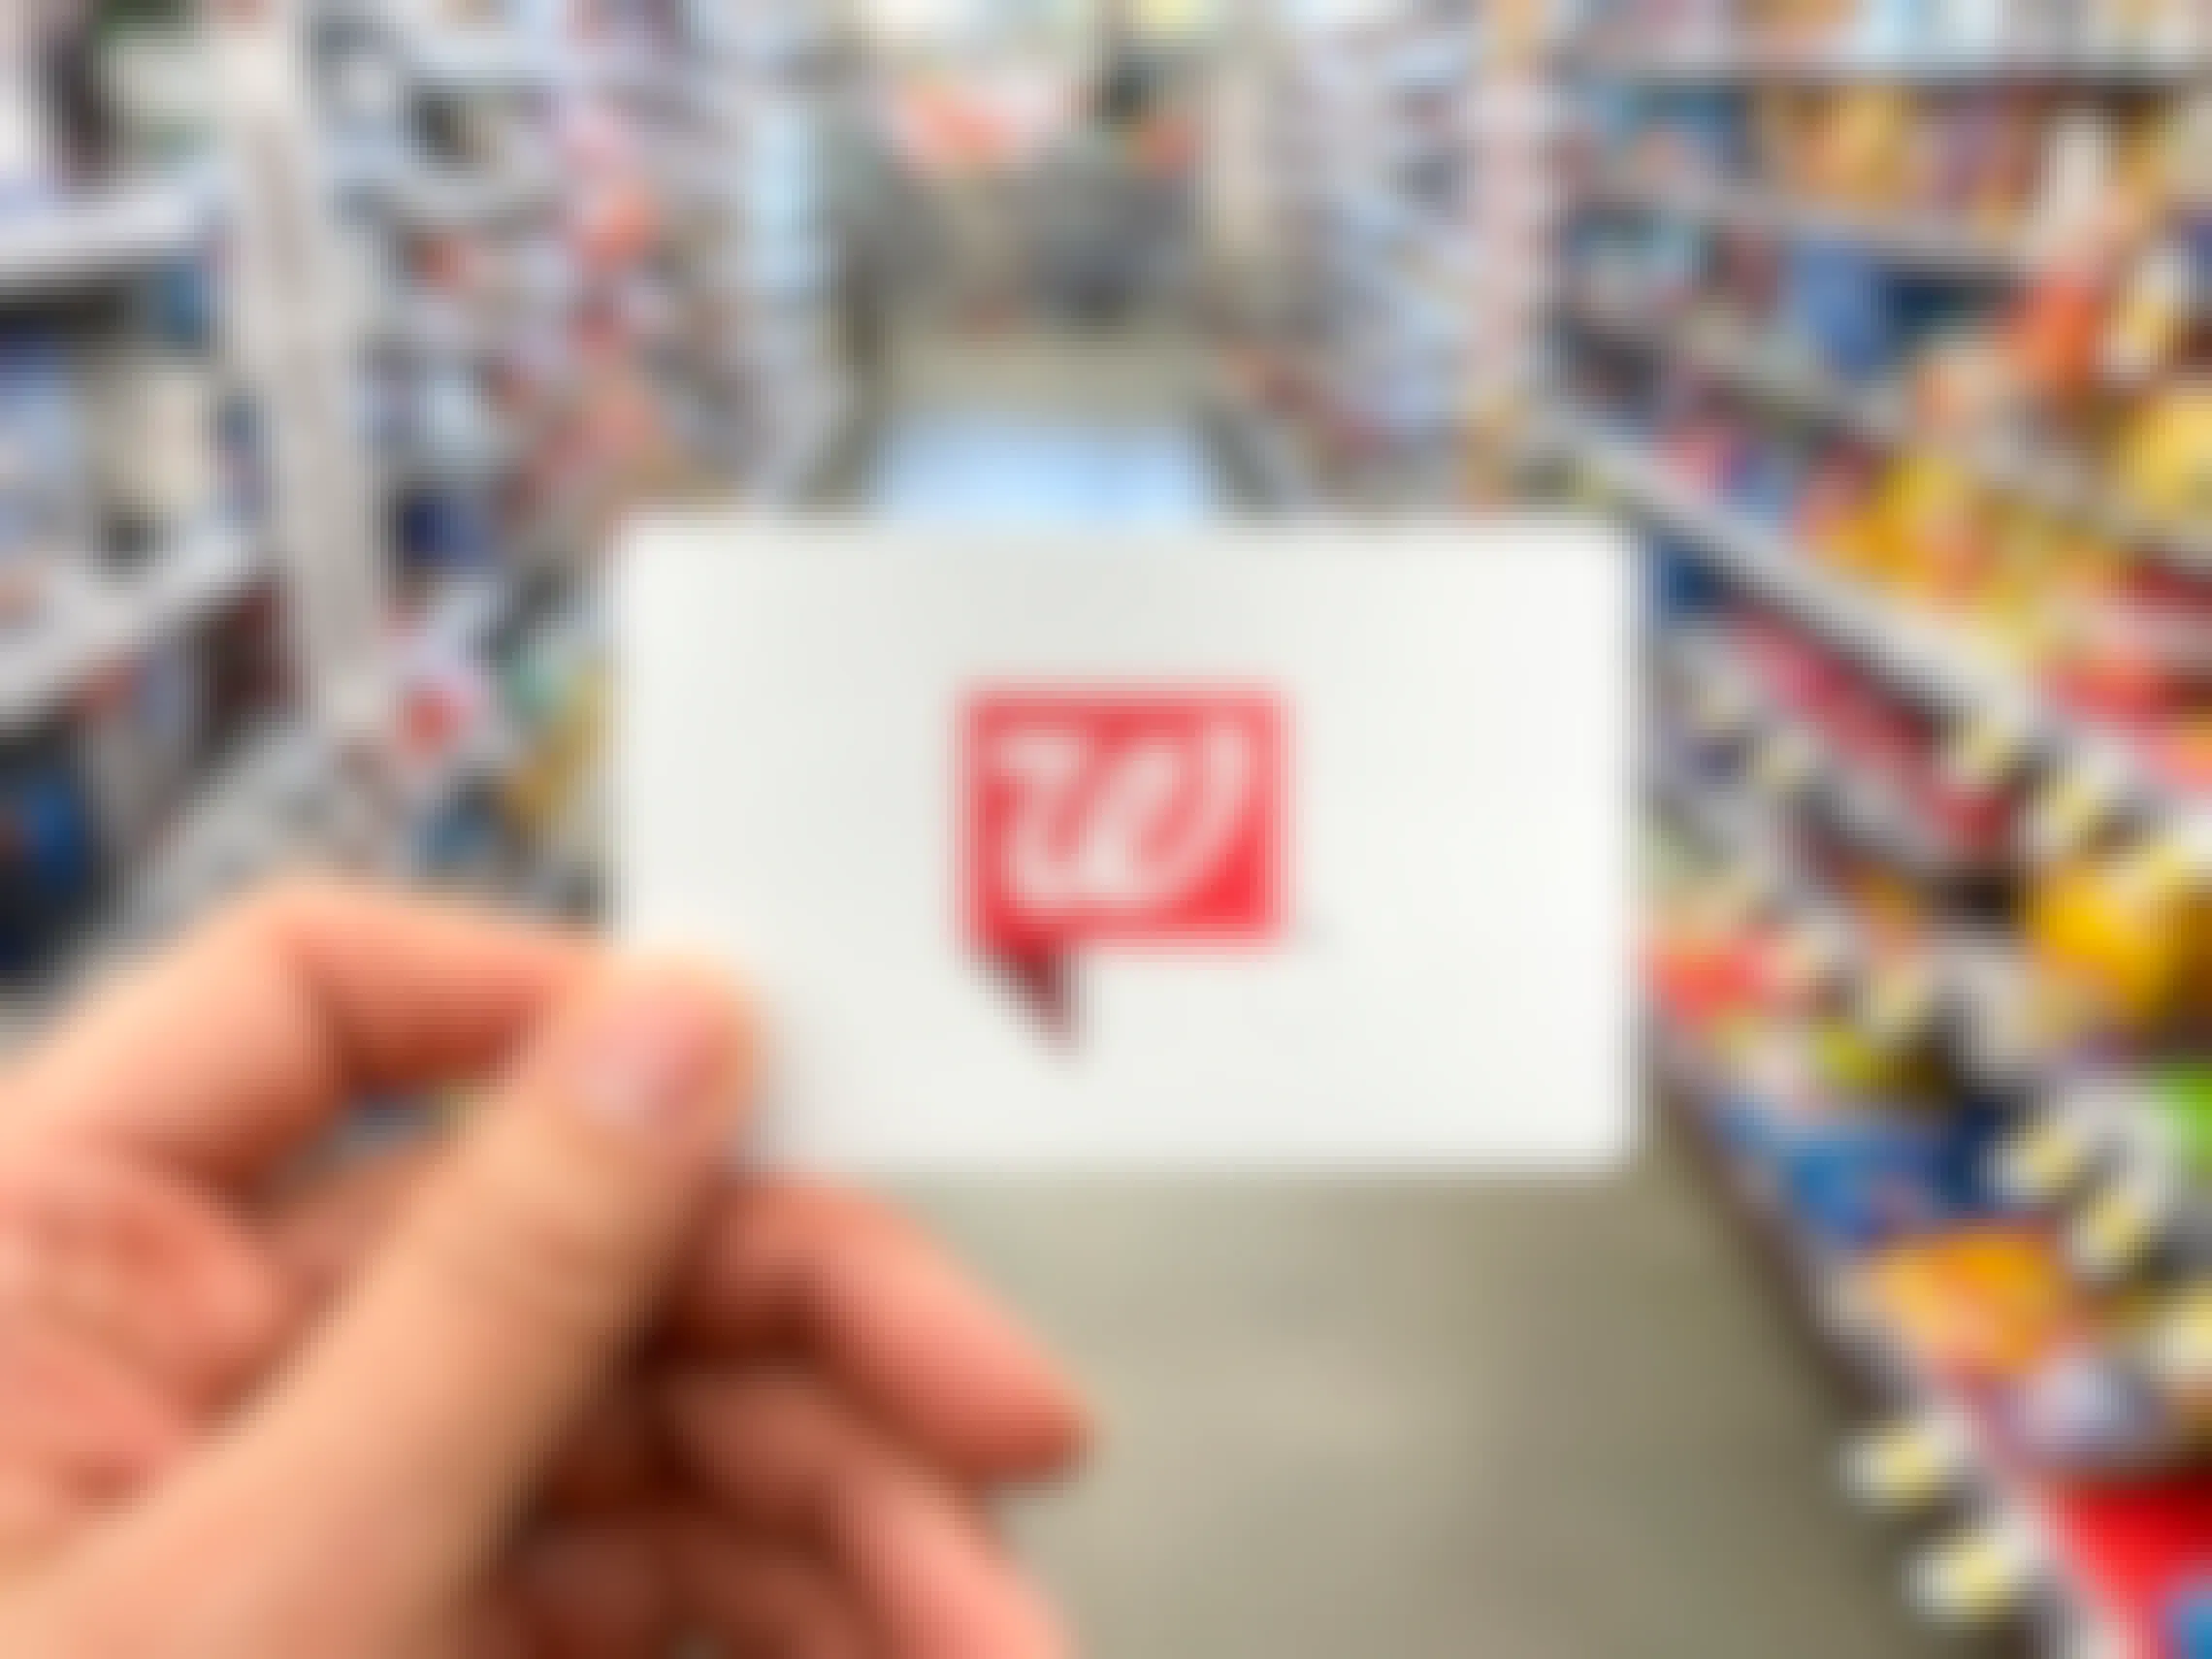 A person holding a Walgreens gift card inside Walgreens.